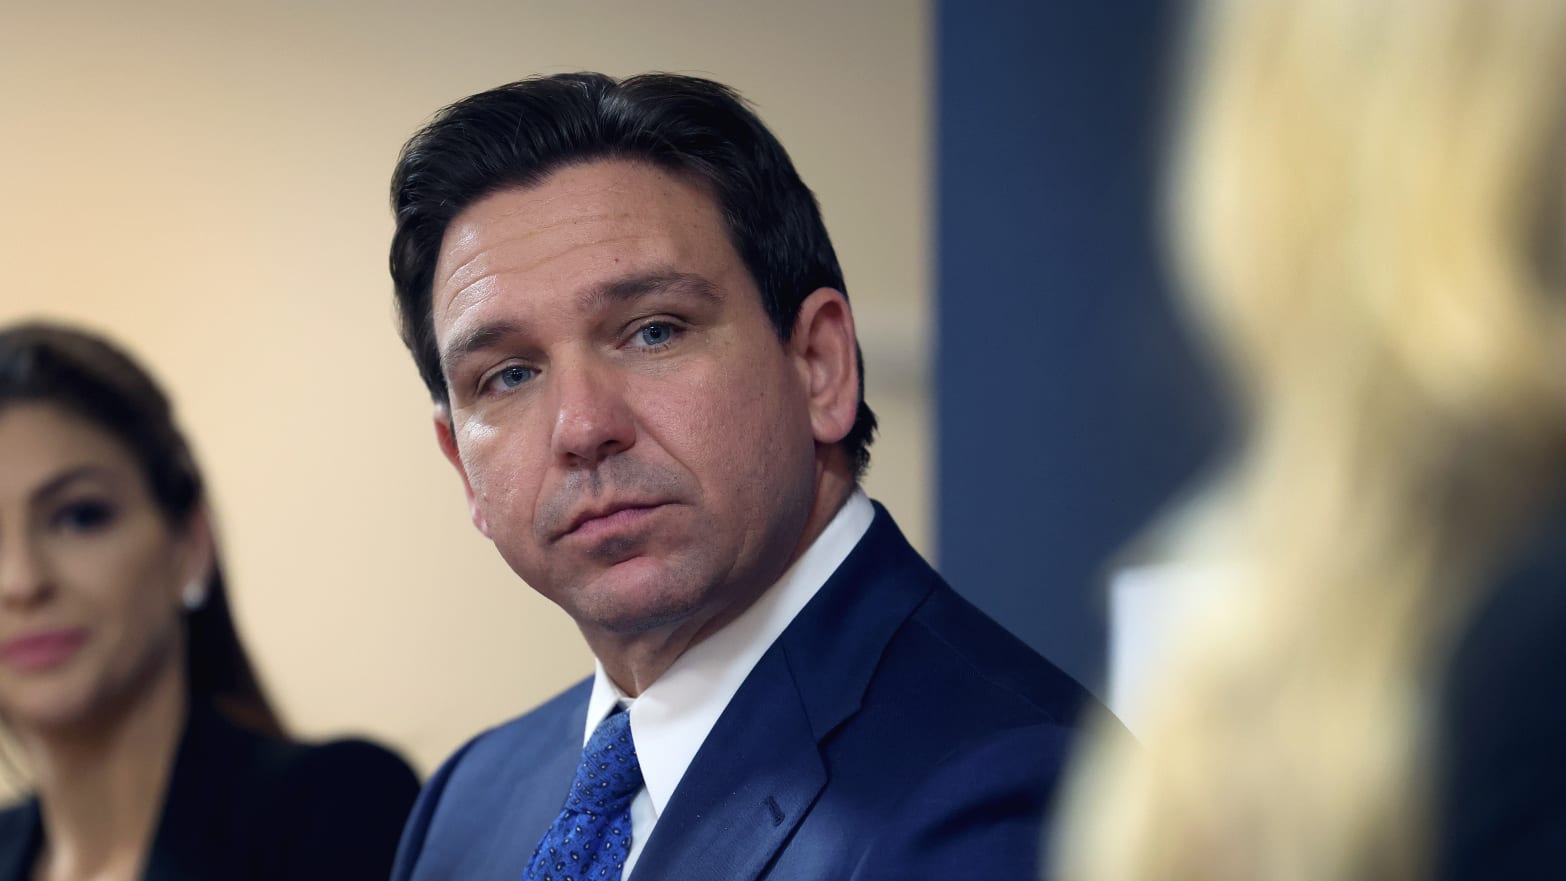 Republican presidential candidate Florida Governor Ron DeSantis speaks to guests during the Scott County Fireside Chat at the Tanglewood Hills Pavilion on December 18, 2023 in Bettendorf, Iowa. (Photo by Scott Olson/Getty Images)"